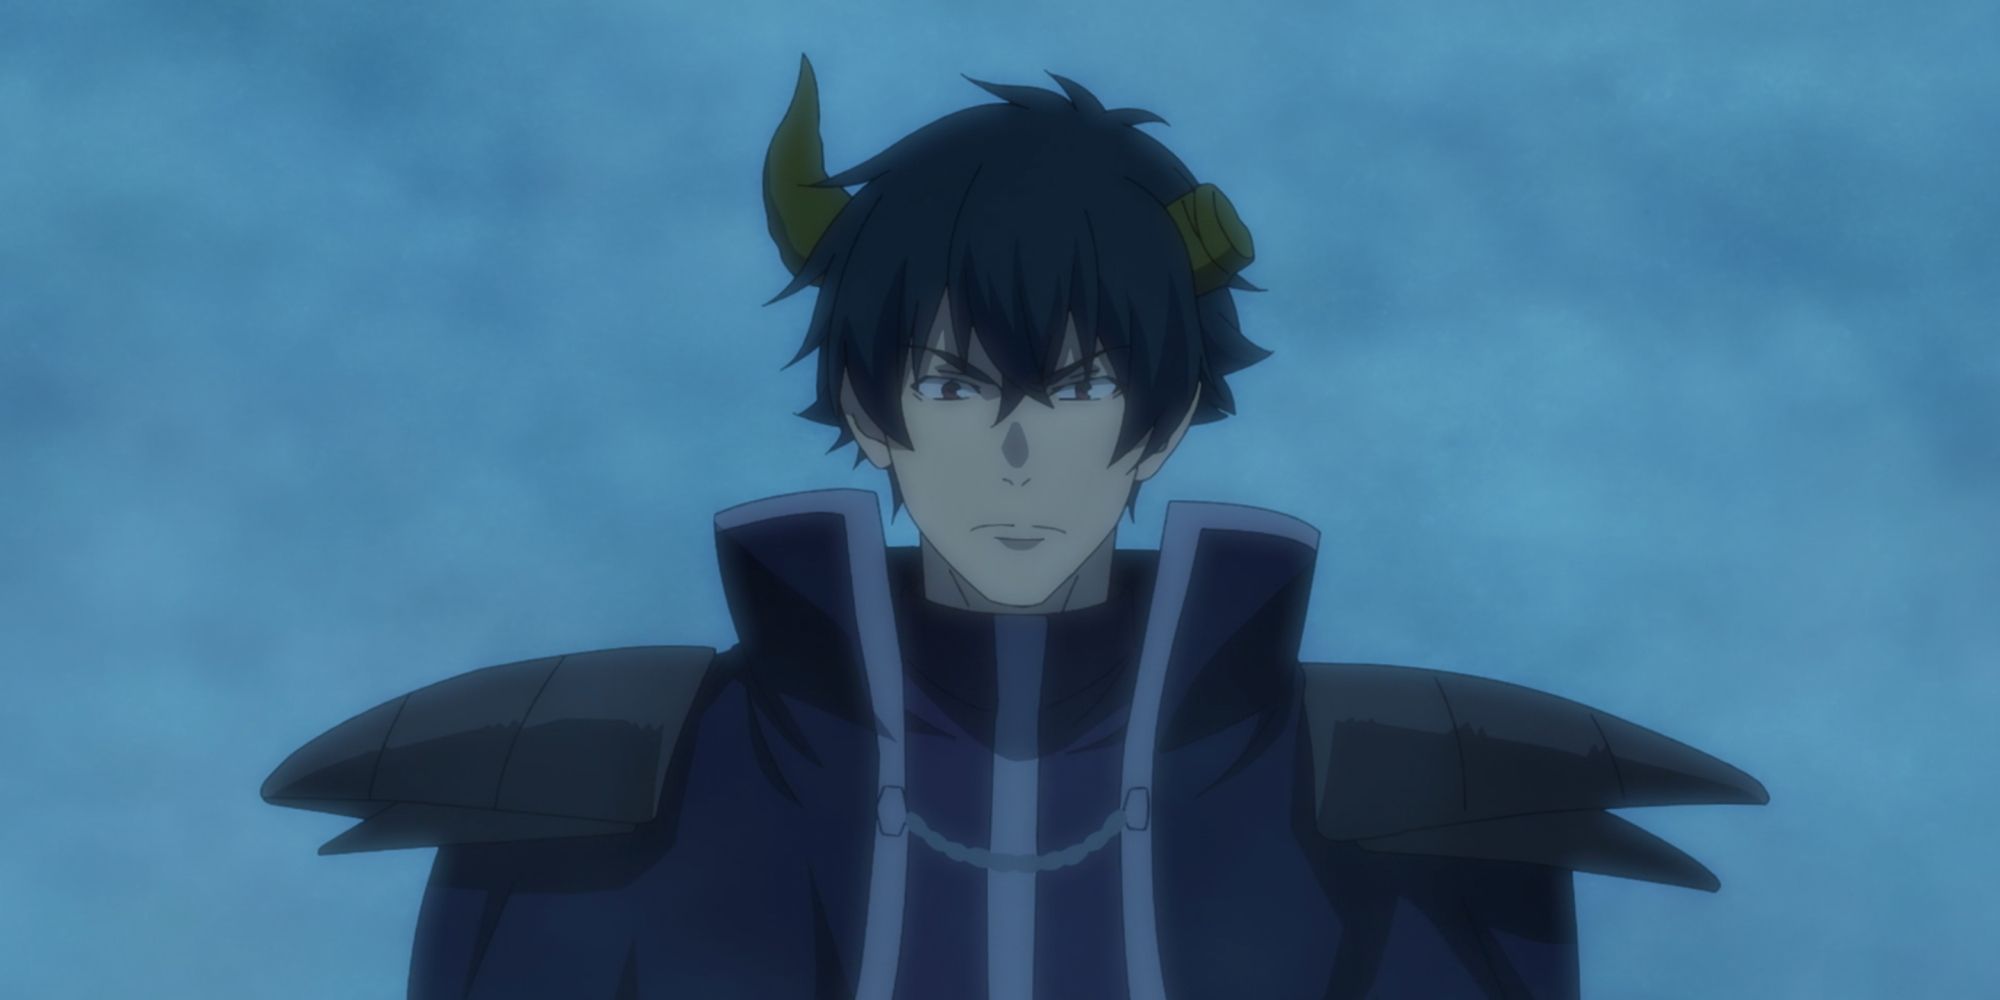 Who would win, Sadao Maou (The Devil is a Part-Timer) vs Diablo (How NOT to  Summon a Demon Lord)? - Quora